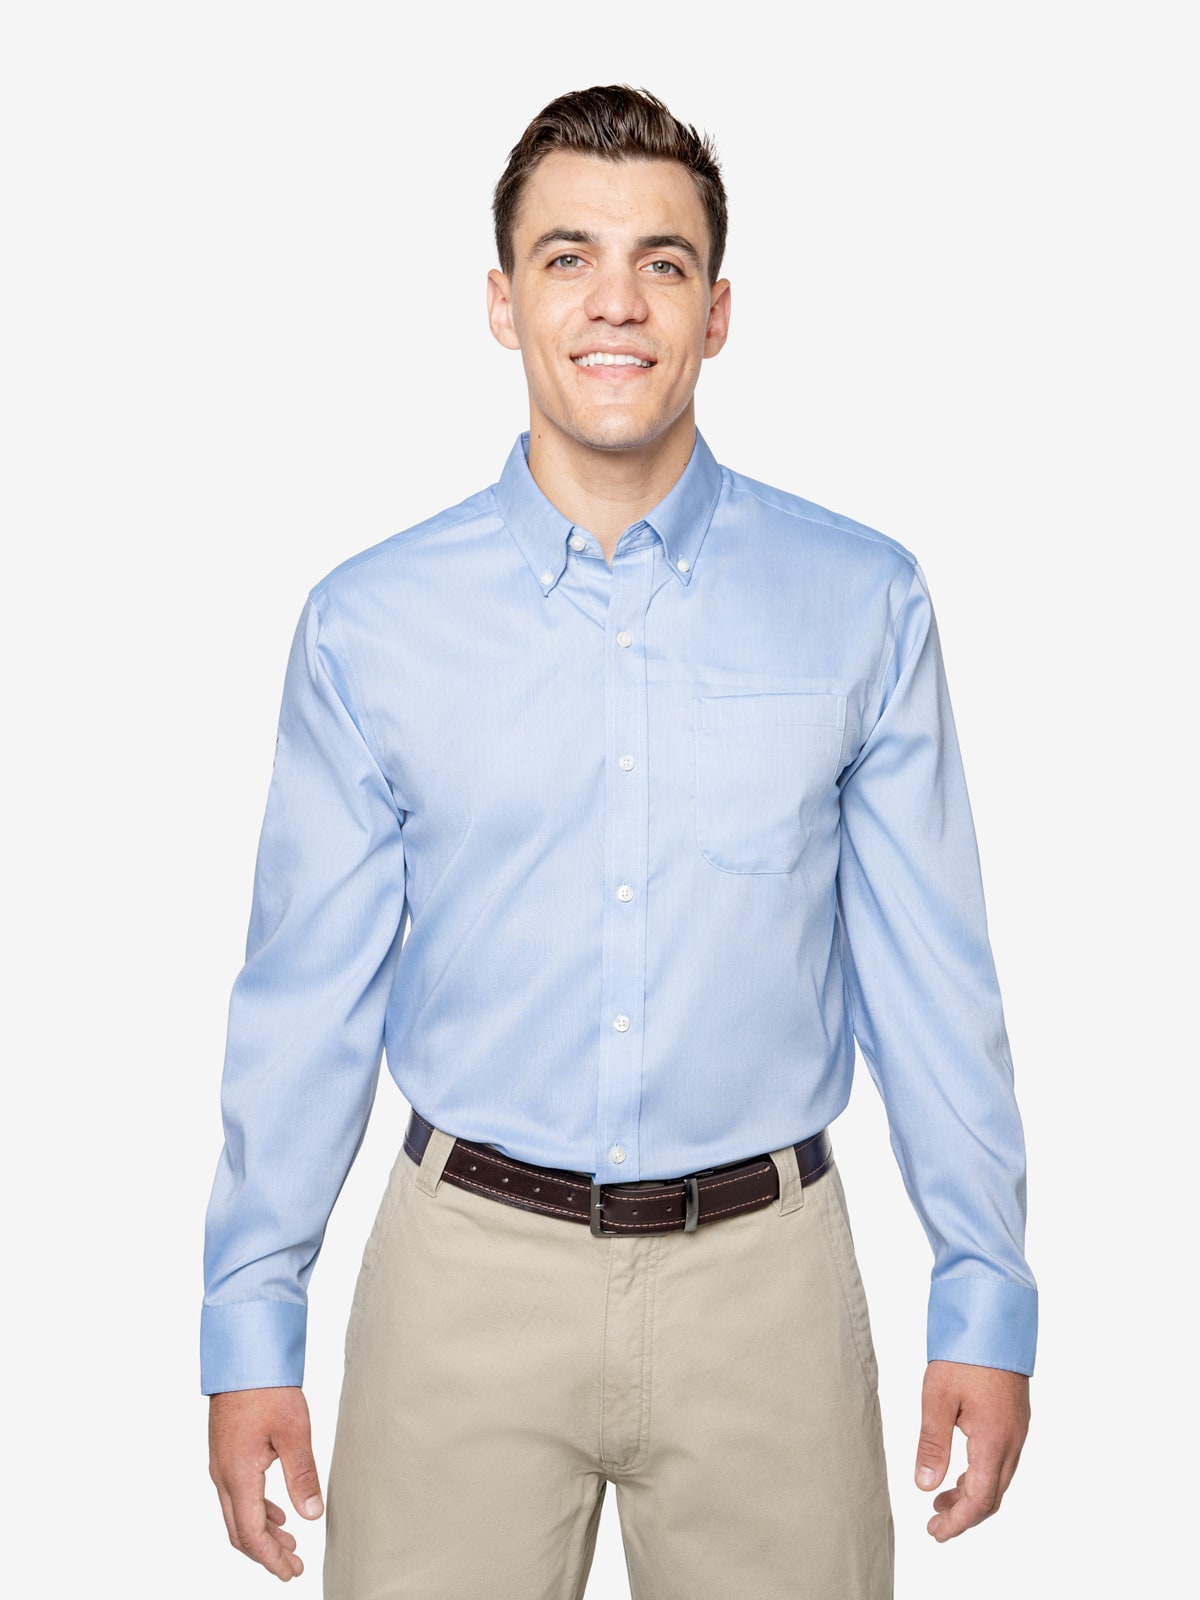 Insect Shield Men's Oxford Shirt